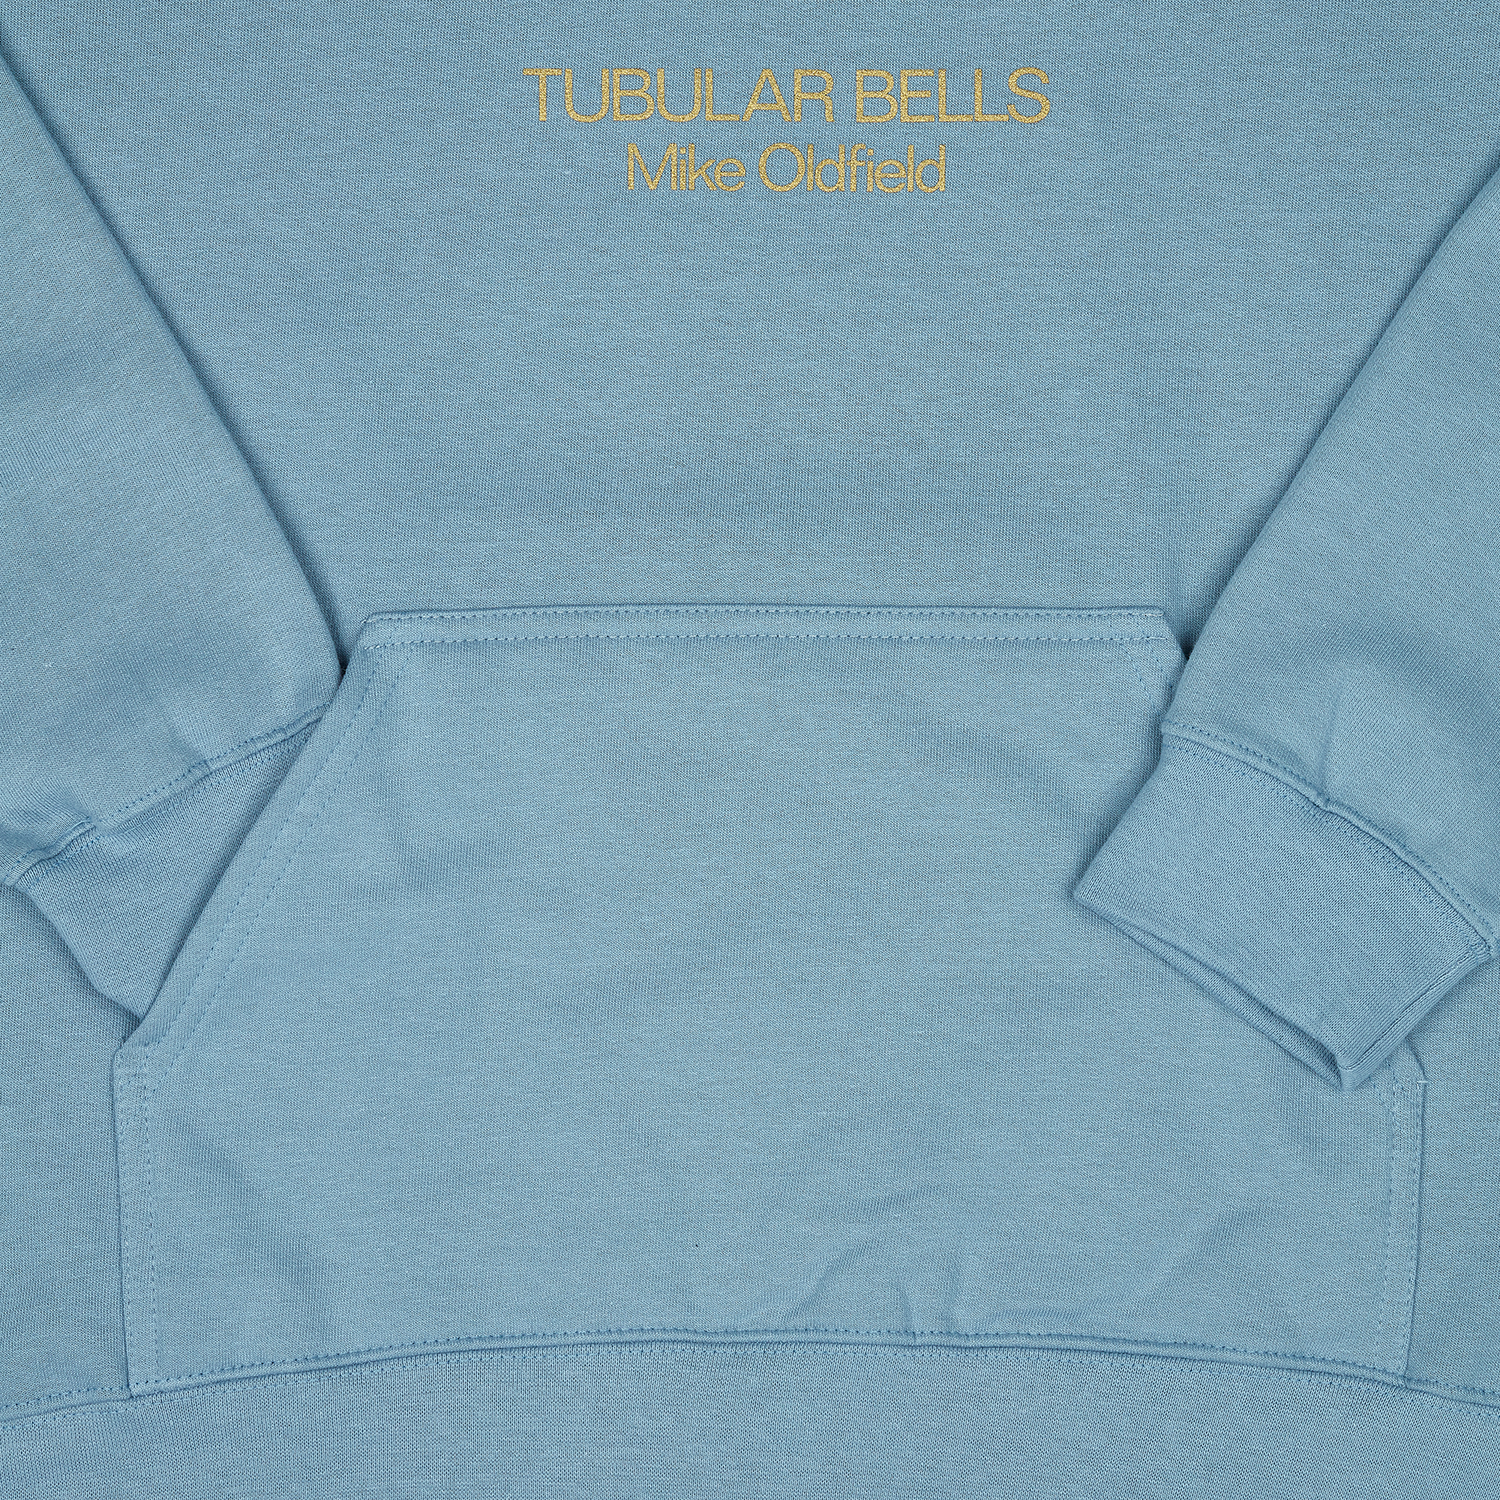 Mike Oldfield - Official Tubular Bells Anniversary Hoodie (Stone Blue)